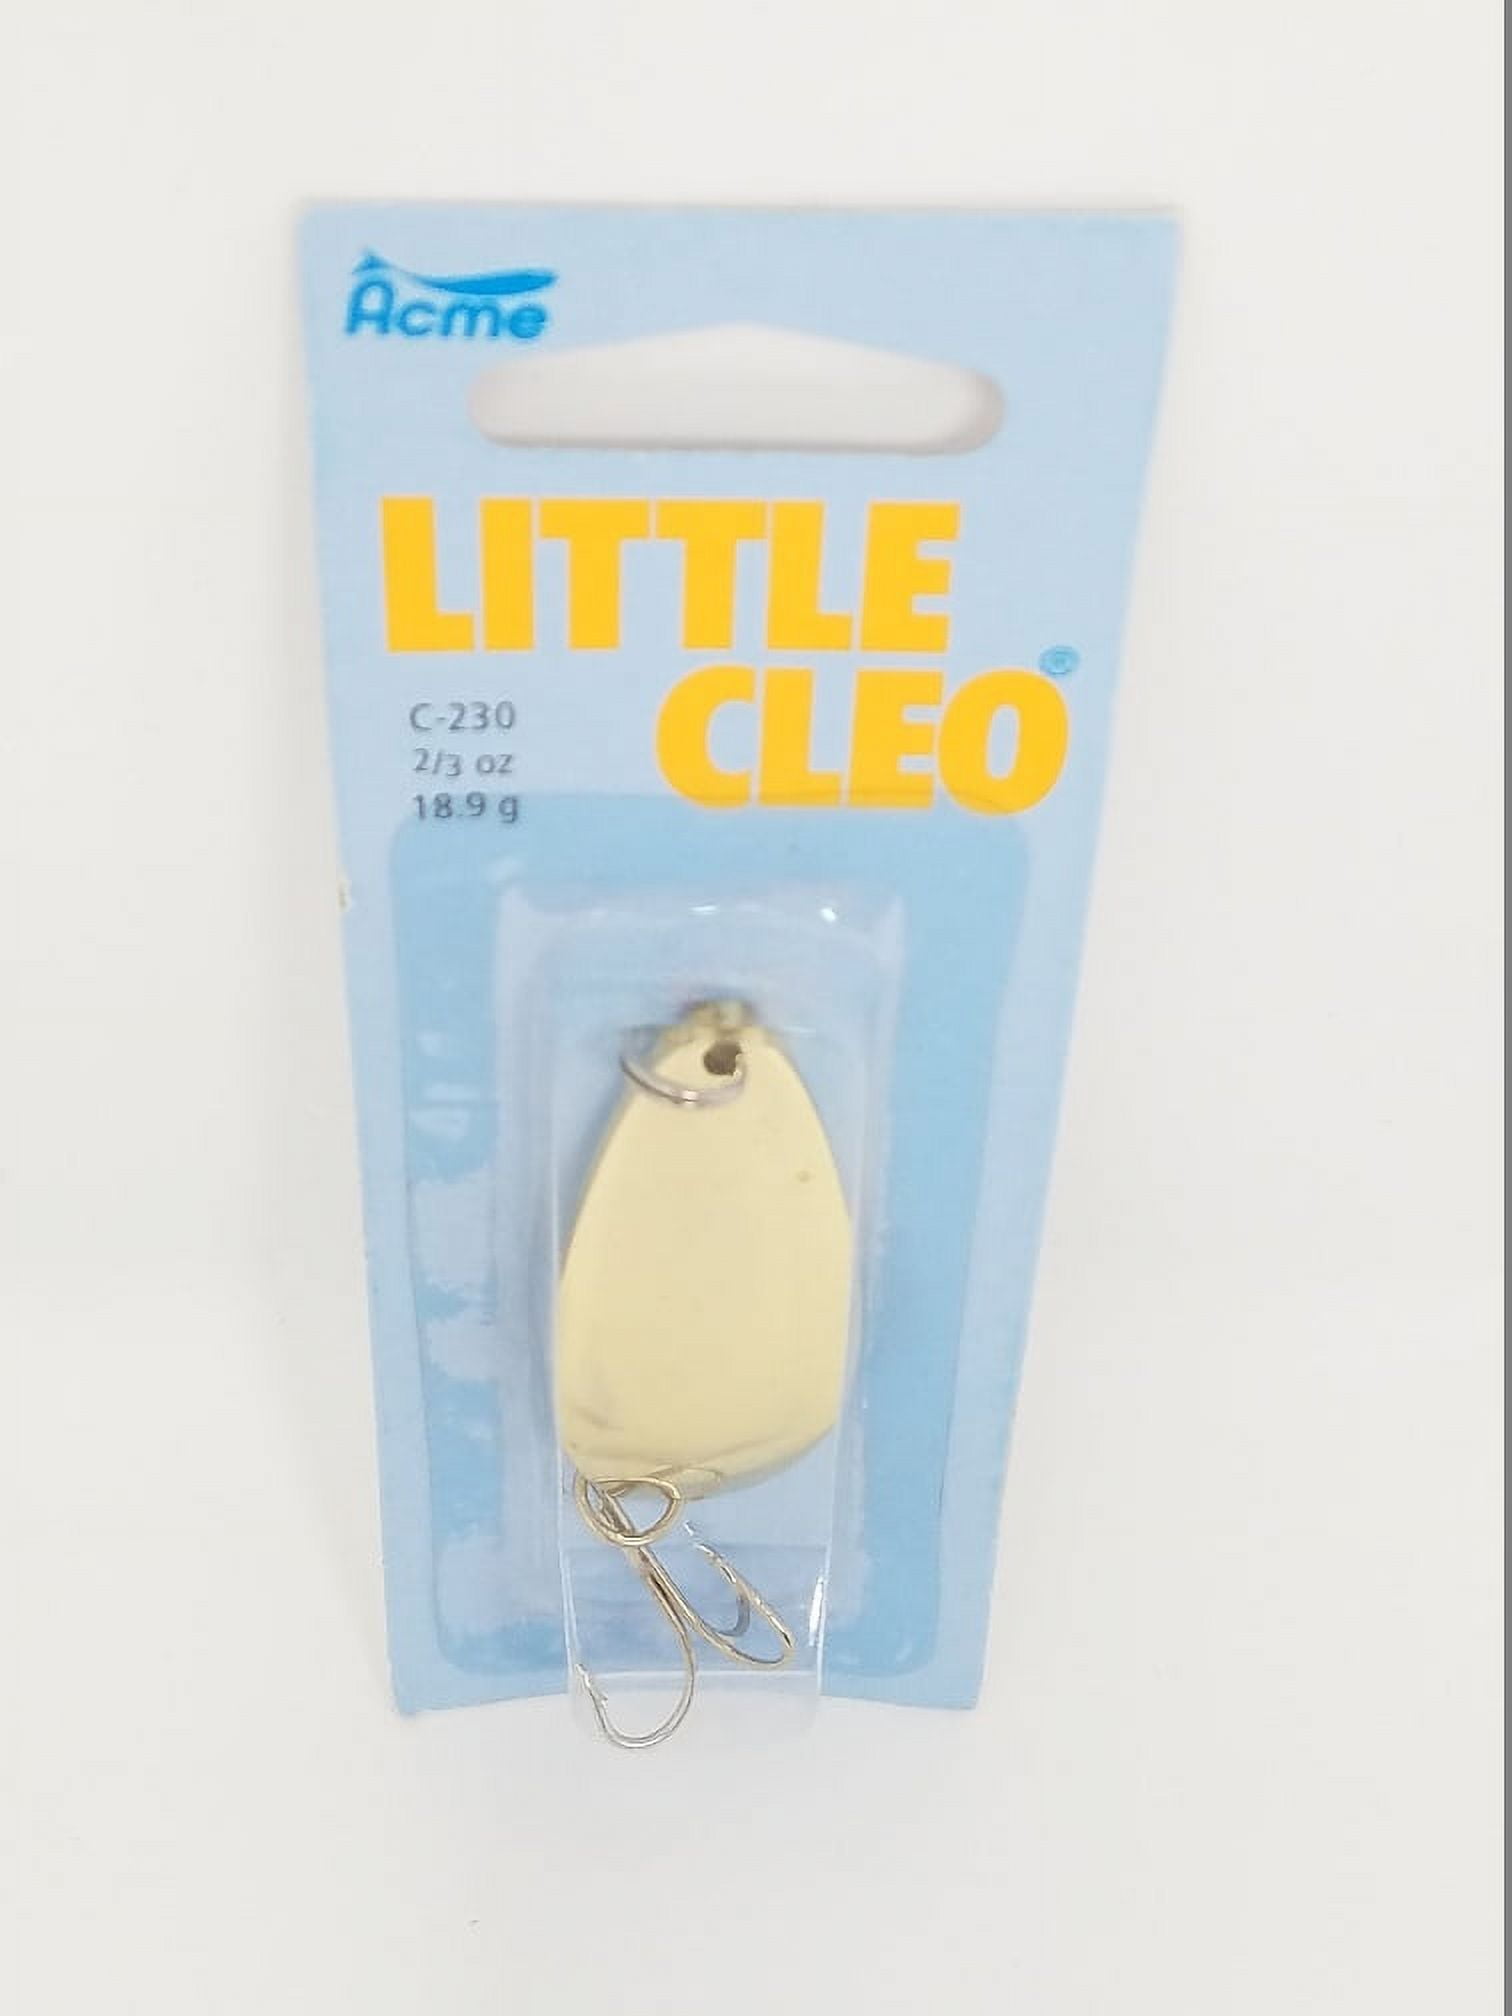 ACME Little Cleo Fishing Lure Spoon 2/3 oz. Gold Colors 